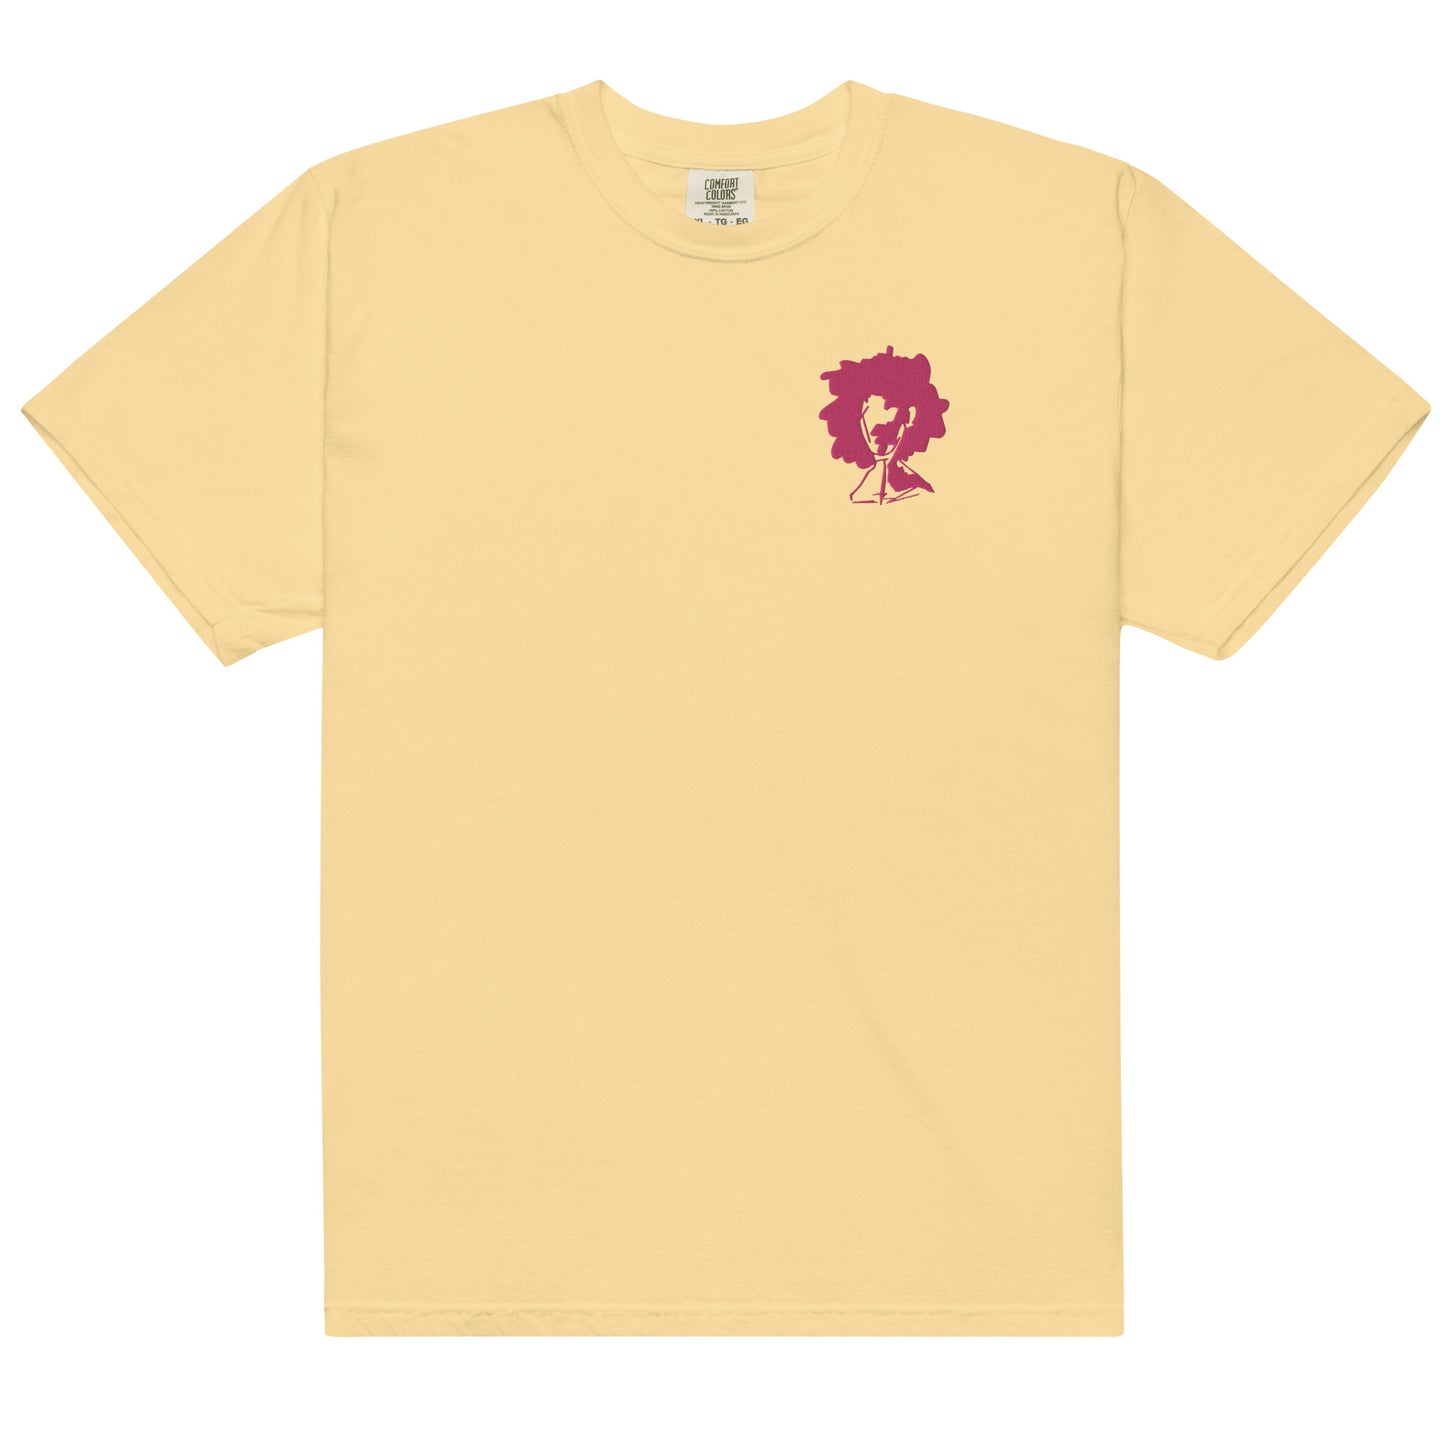 FREE Embroidered T-Shirt - ParrisPieces